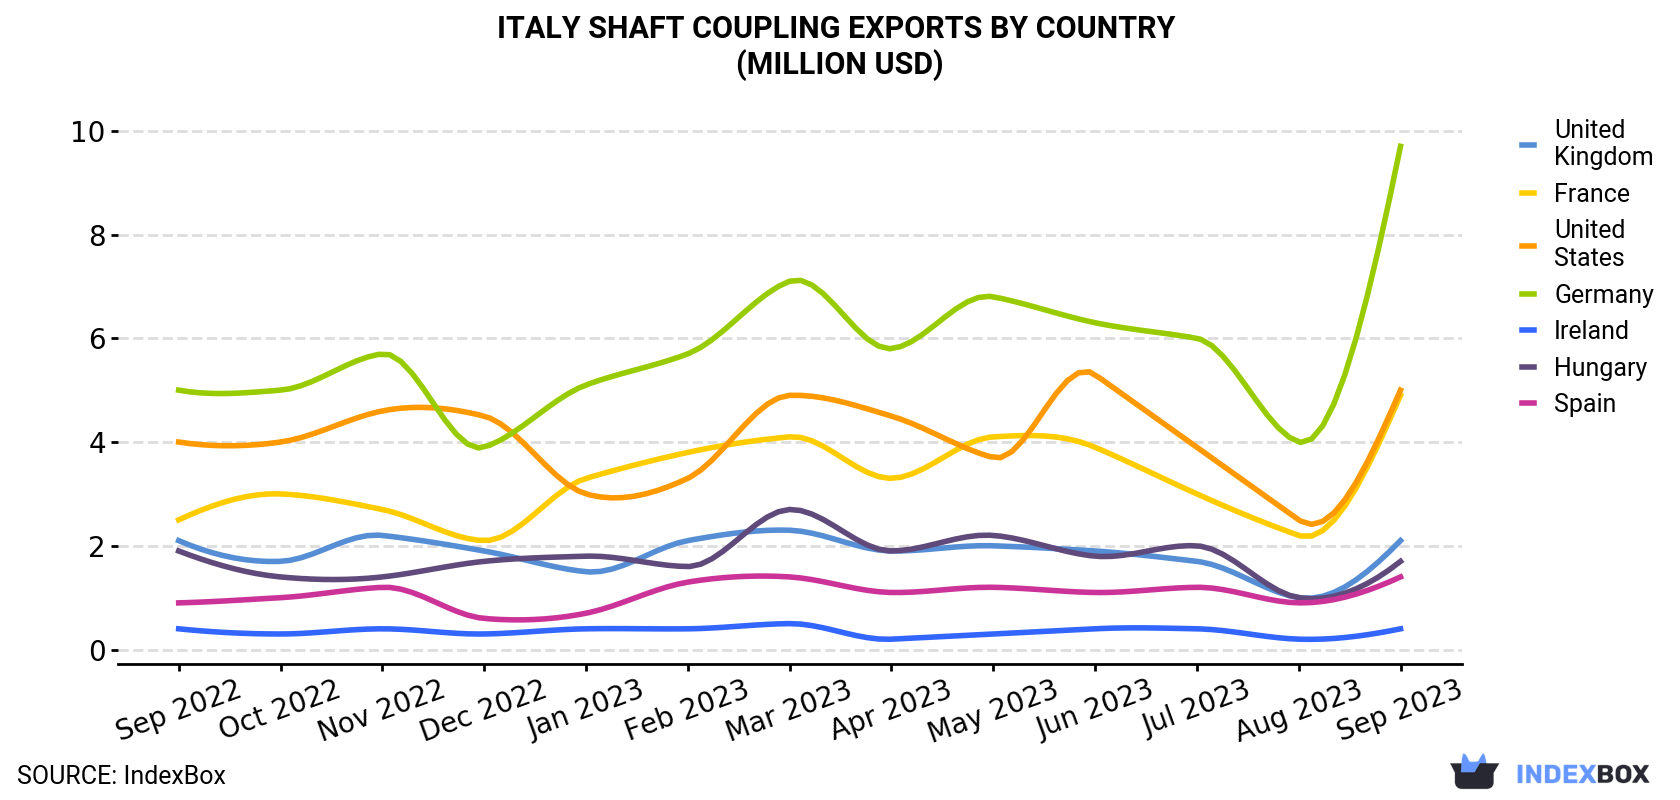 Italy Shaft Coupling Exports By Country (Million USD)